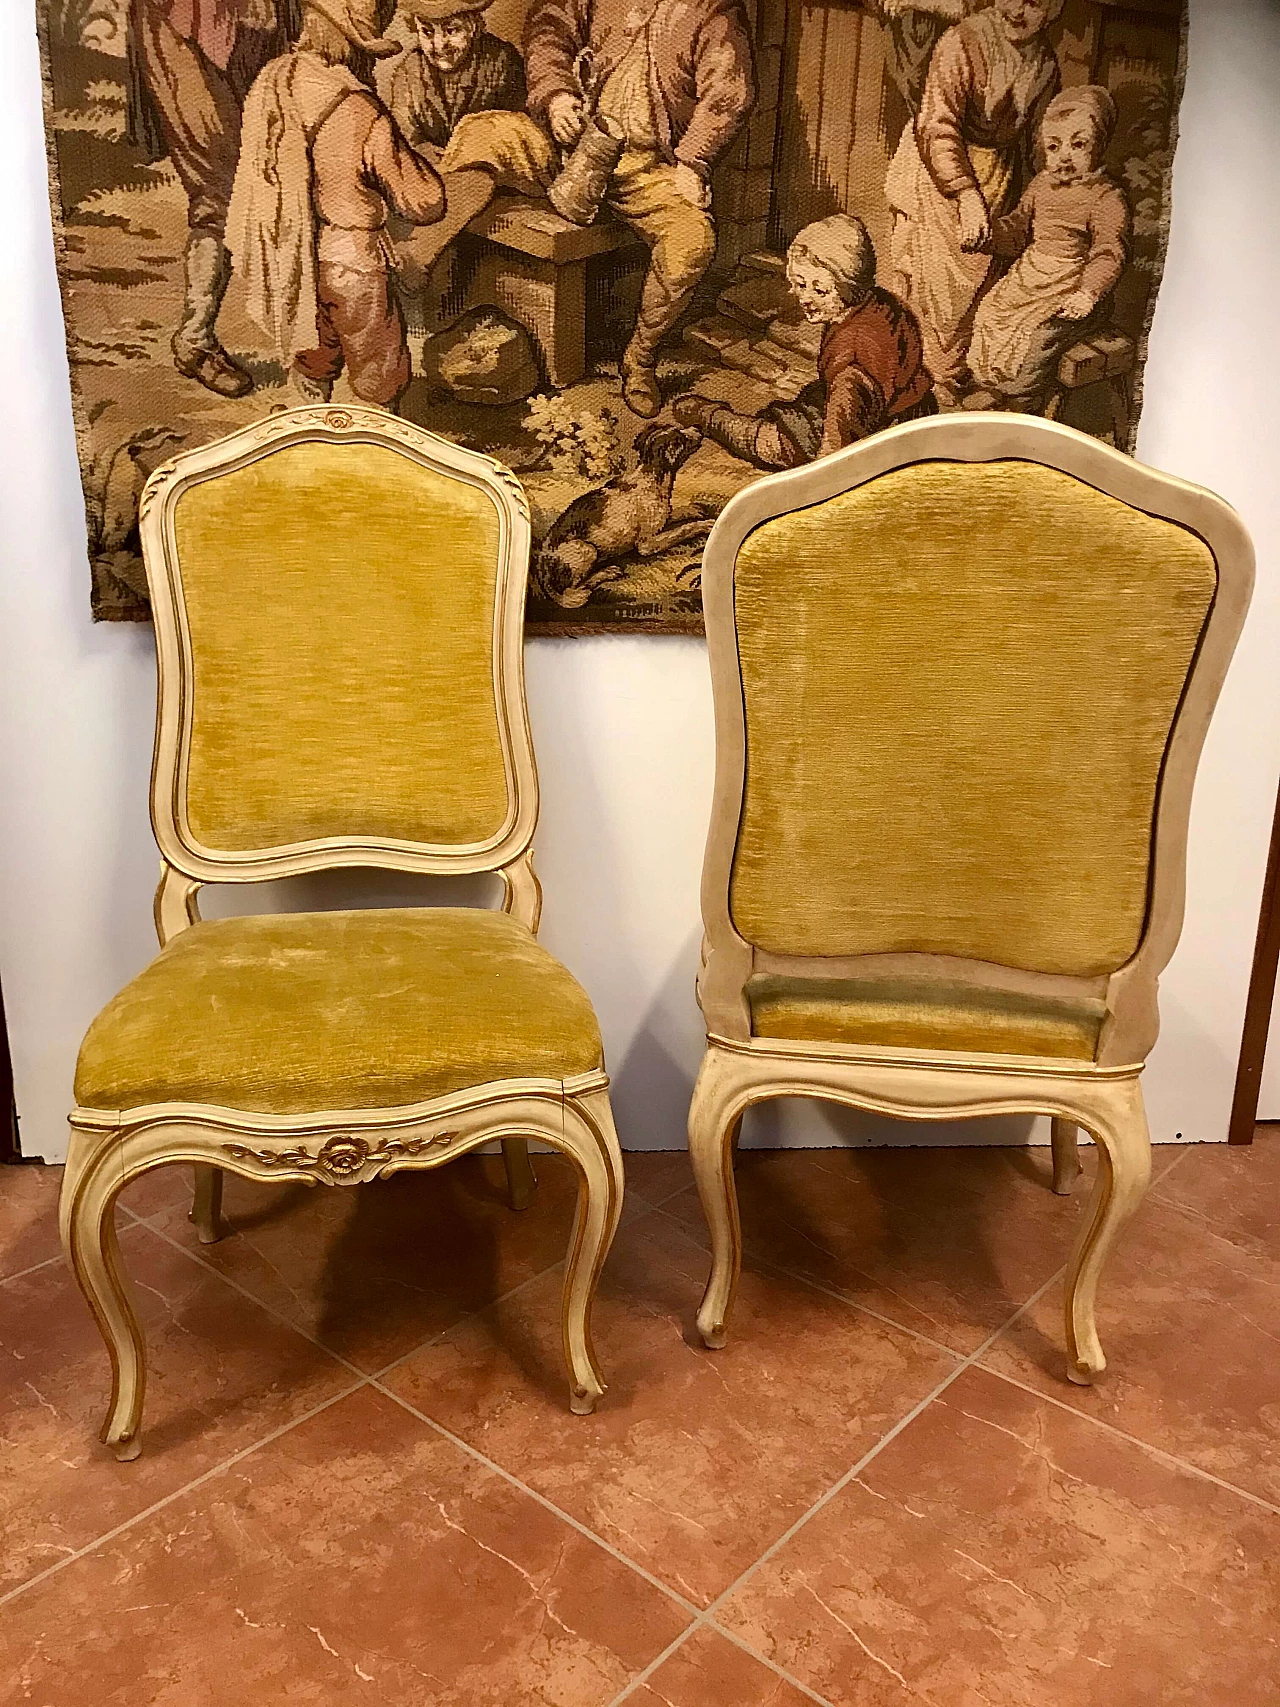 Set of 1 armchair and 2 lacquered and gilded chairs lined with gold-colored velvet, original mid 20th century 1222450